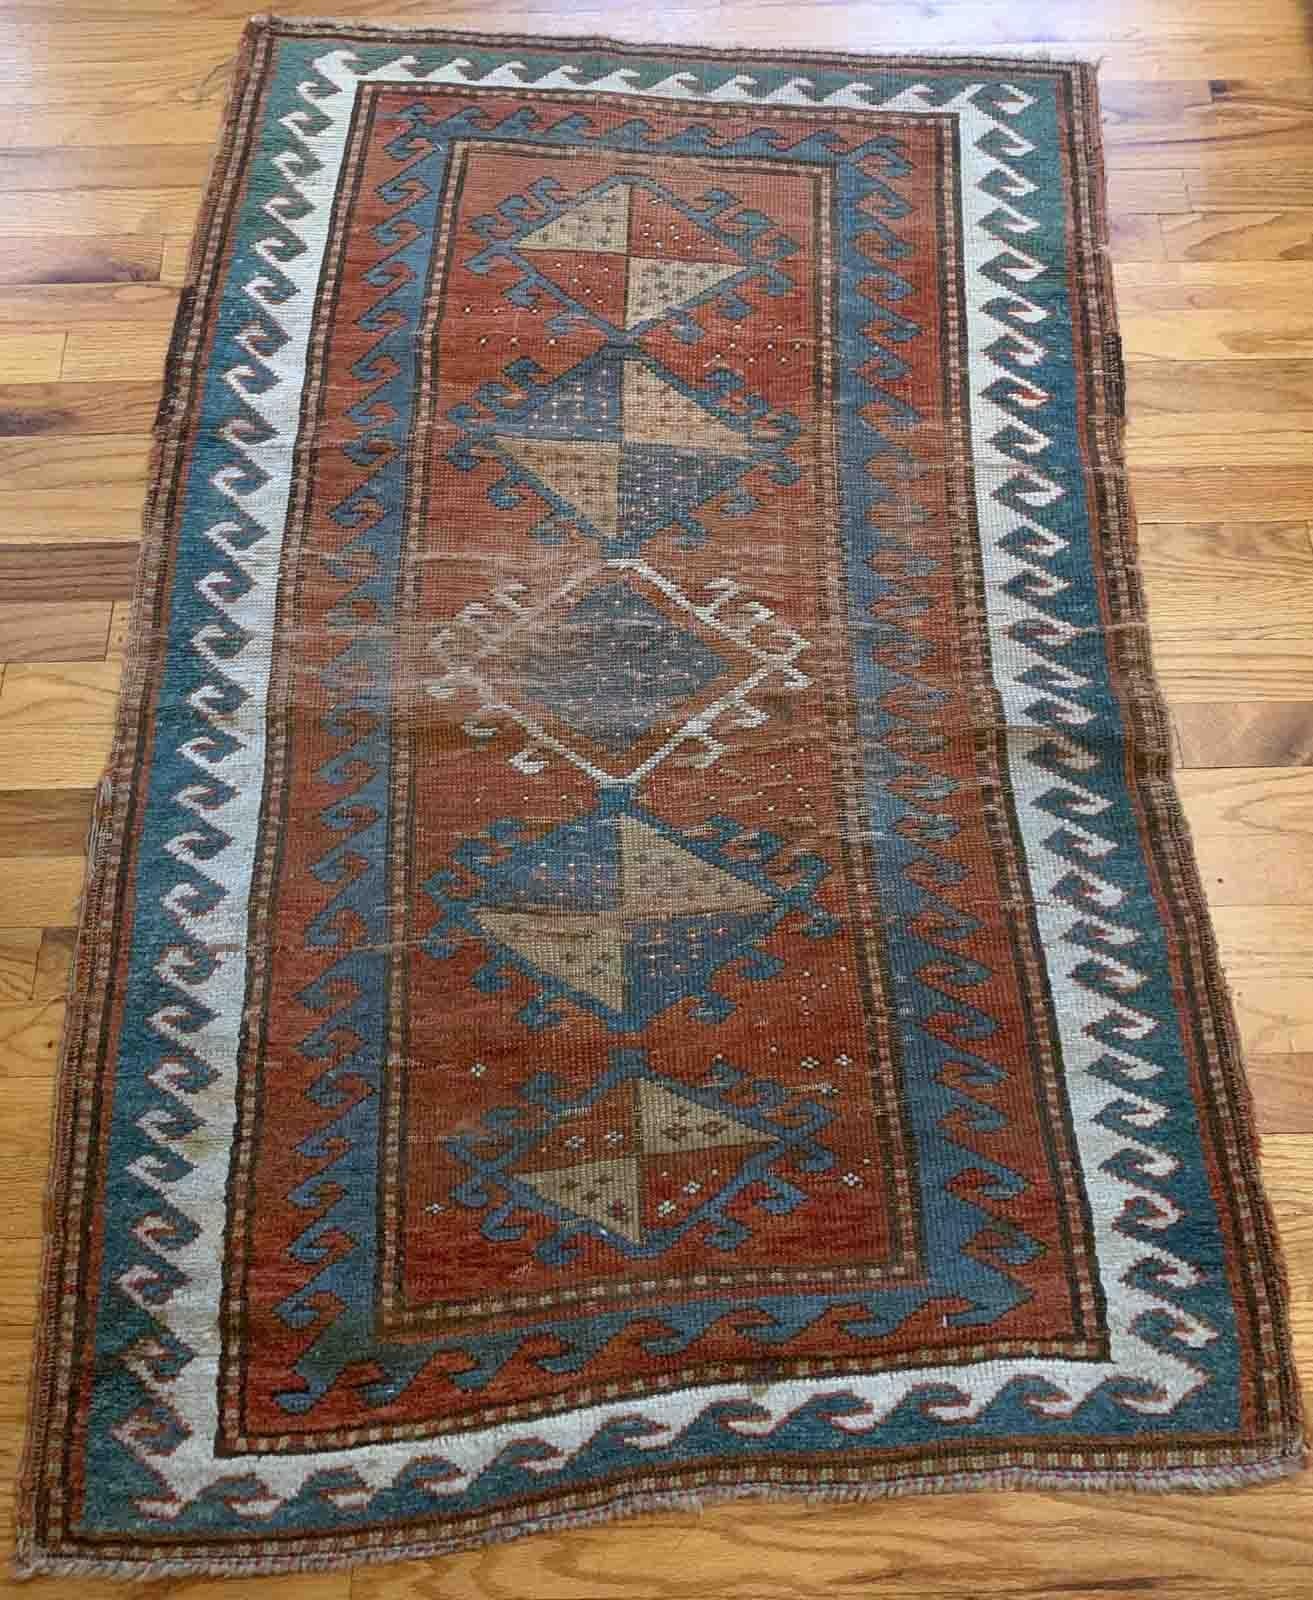 Handmade antique collectible Caucasian Kazak rug in natural dyes. The rug is from the end of 19th century in original condition, it has some age wear

-condition: original, some age wear,

-circa: 1880s,

-size: 2.7' x 4.2' (82cm x